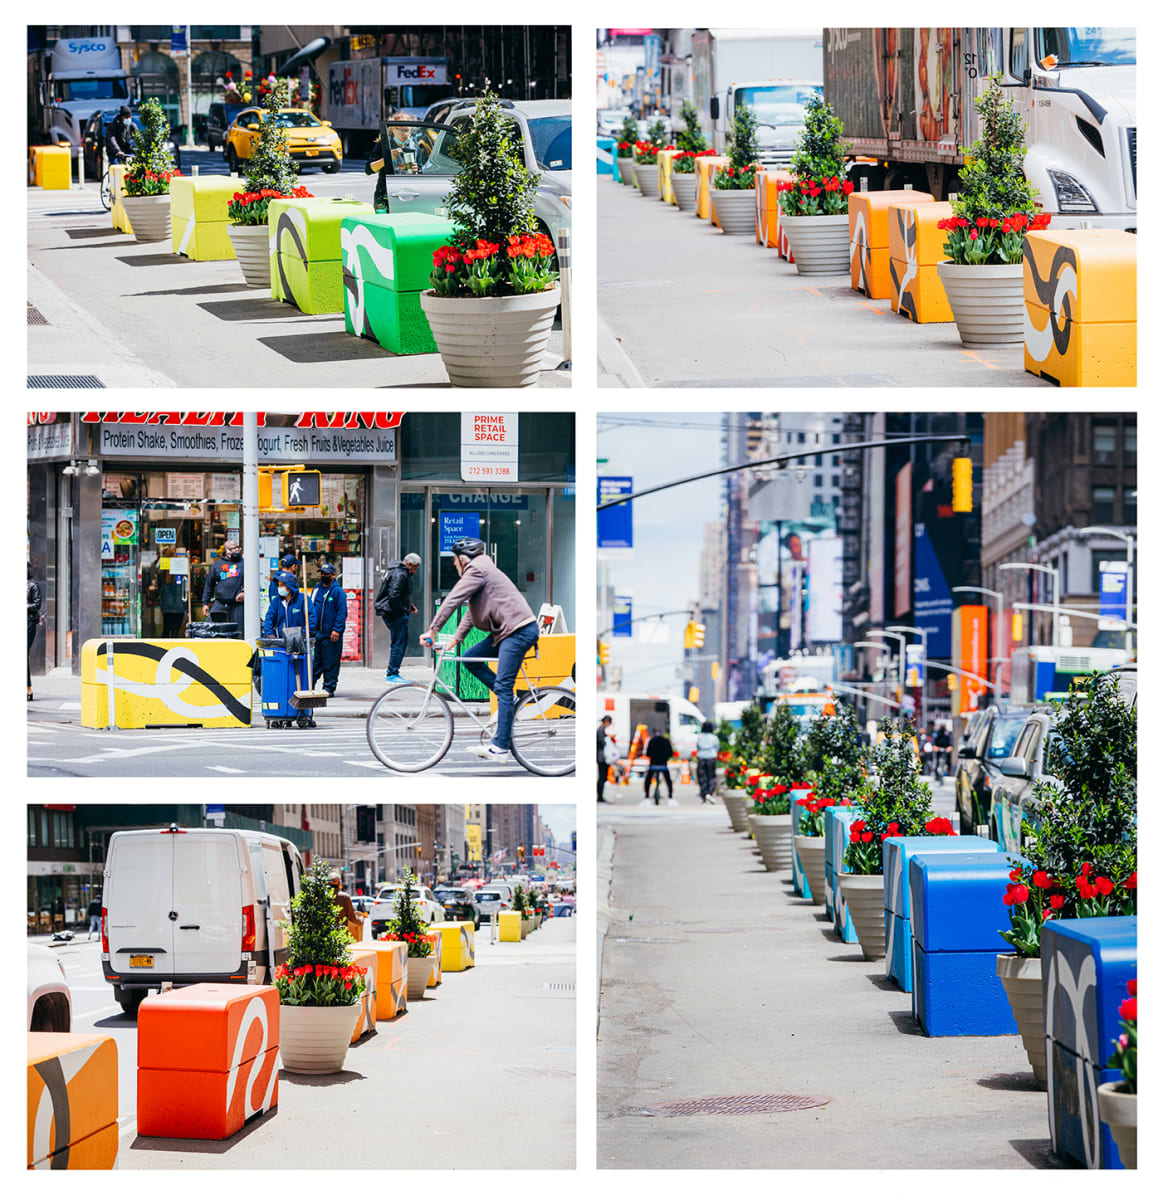 Spectrum by Kim Carlino  Image: Public Art Commission for Garment District Alliance. NYC.